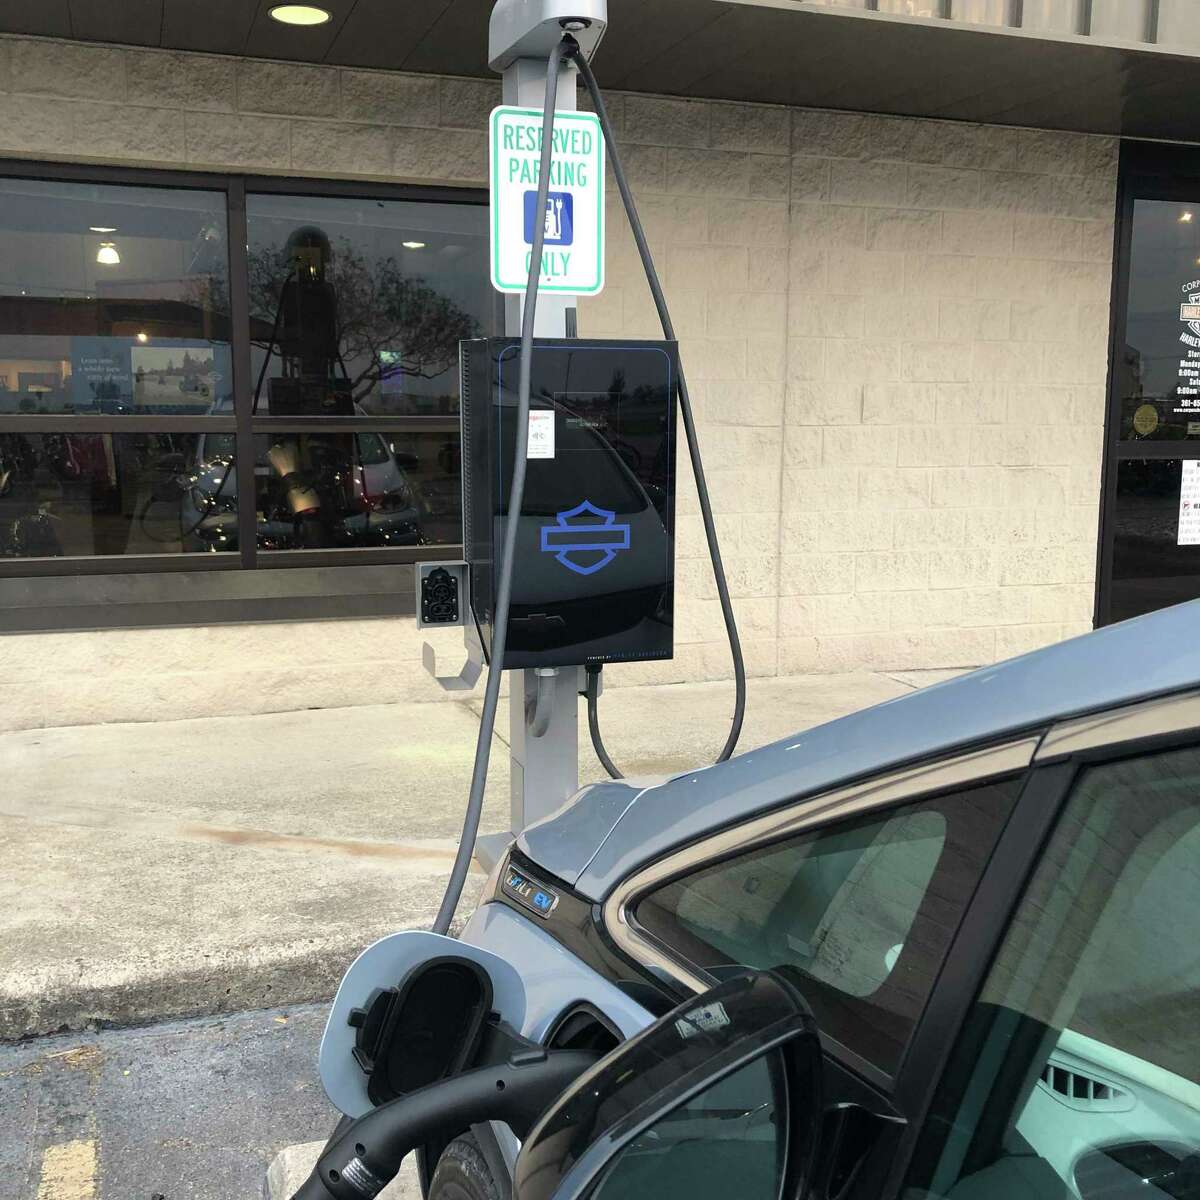 A Chevy Bolt charging at the DC Fast Charging facility at the Harley Davidson dealership in Corpus Christi, Texas.